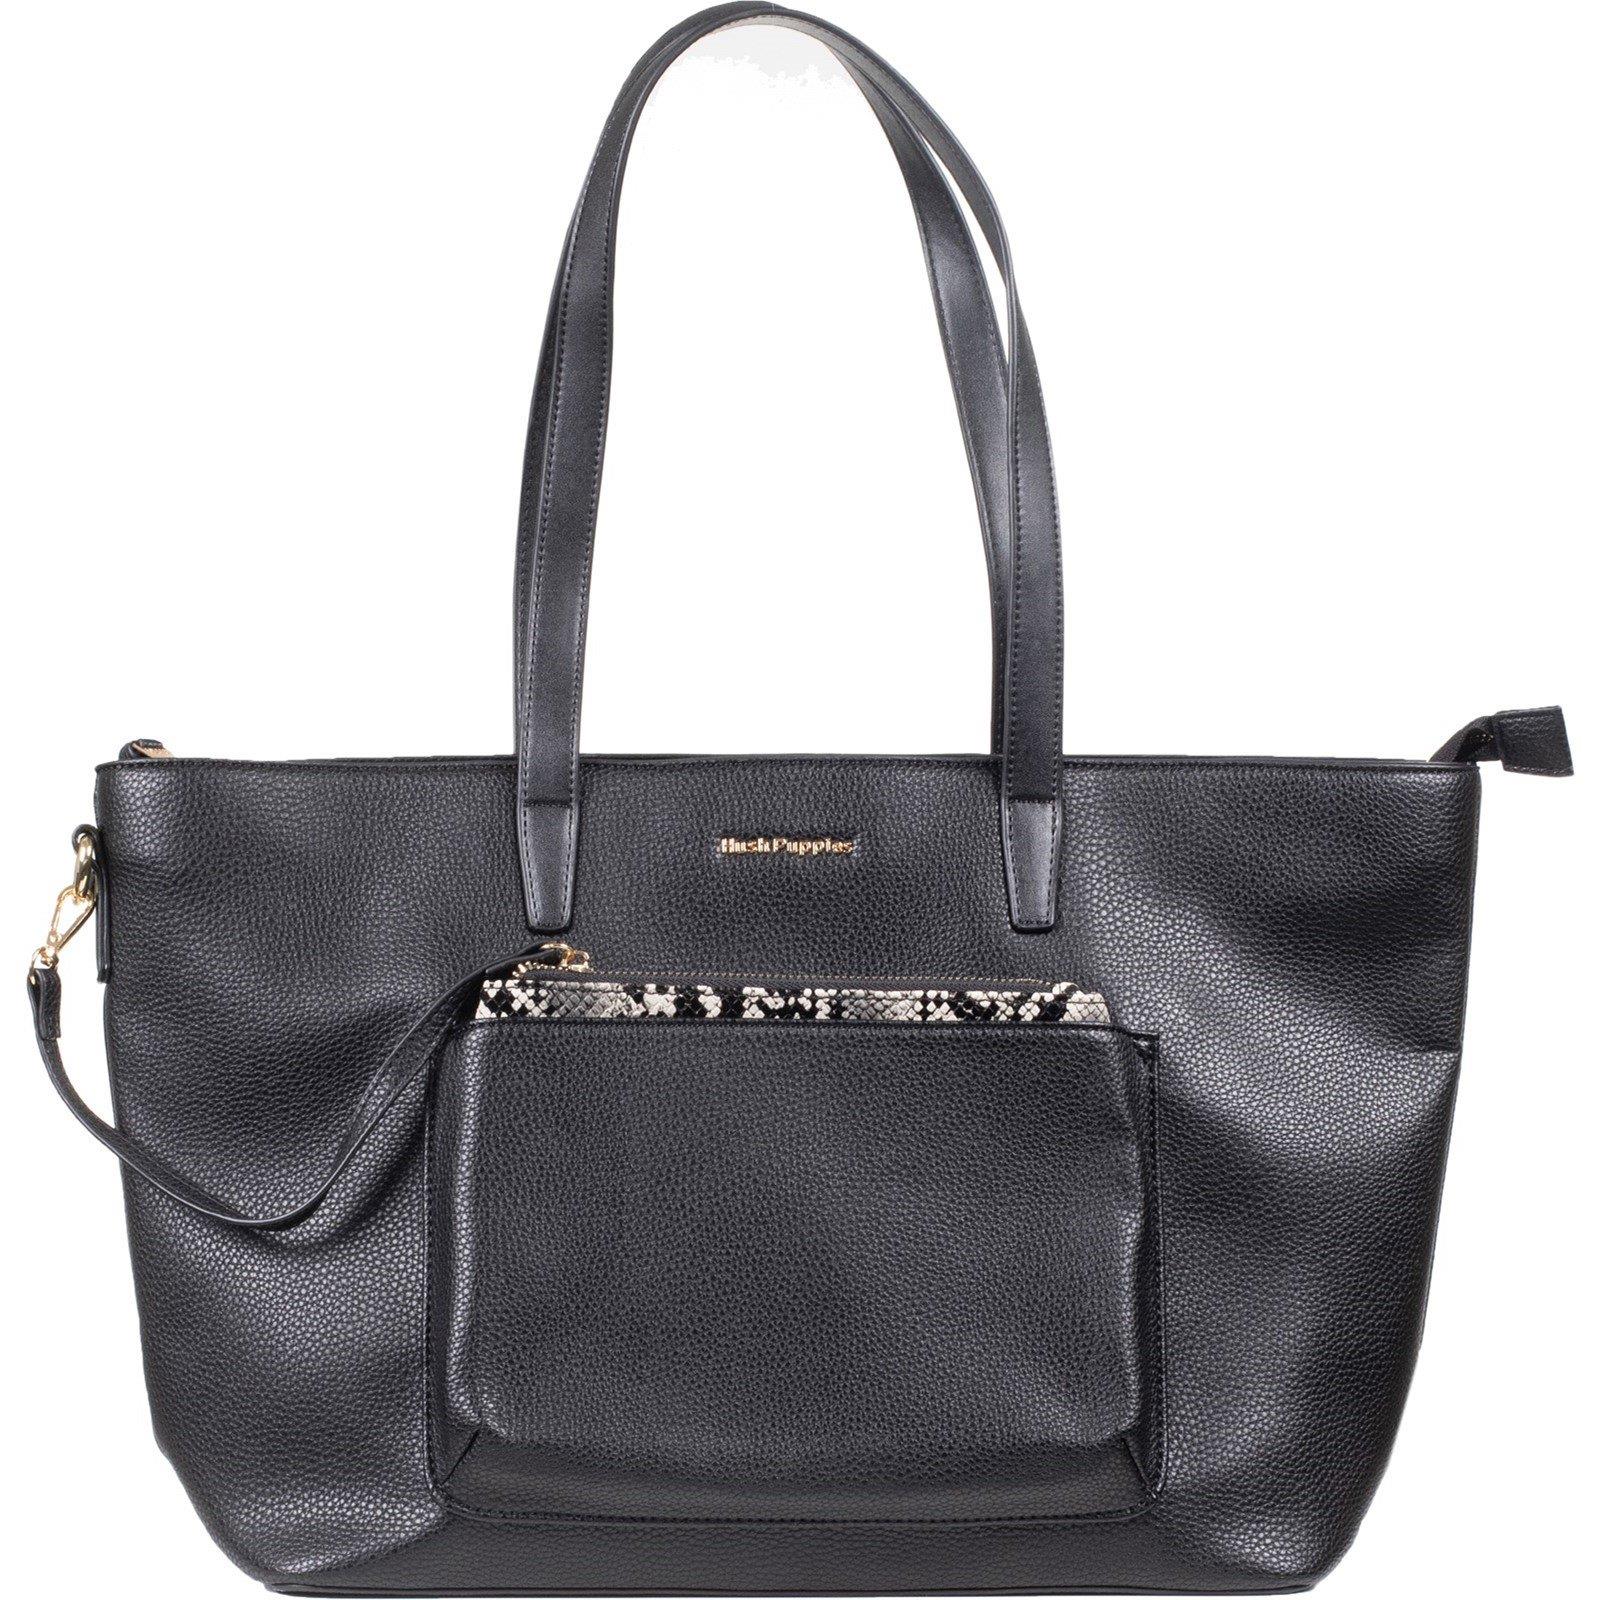 Hush Puppies Sadie black tote bag with removeable snakeskin print pouch